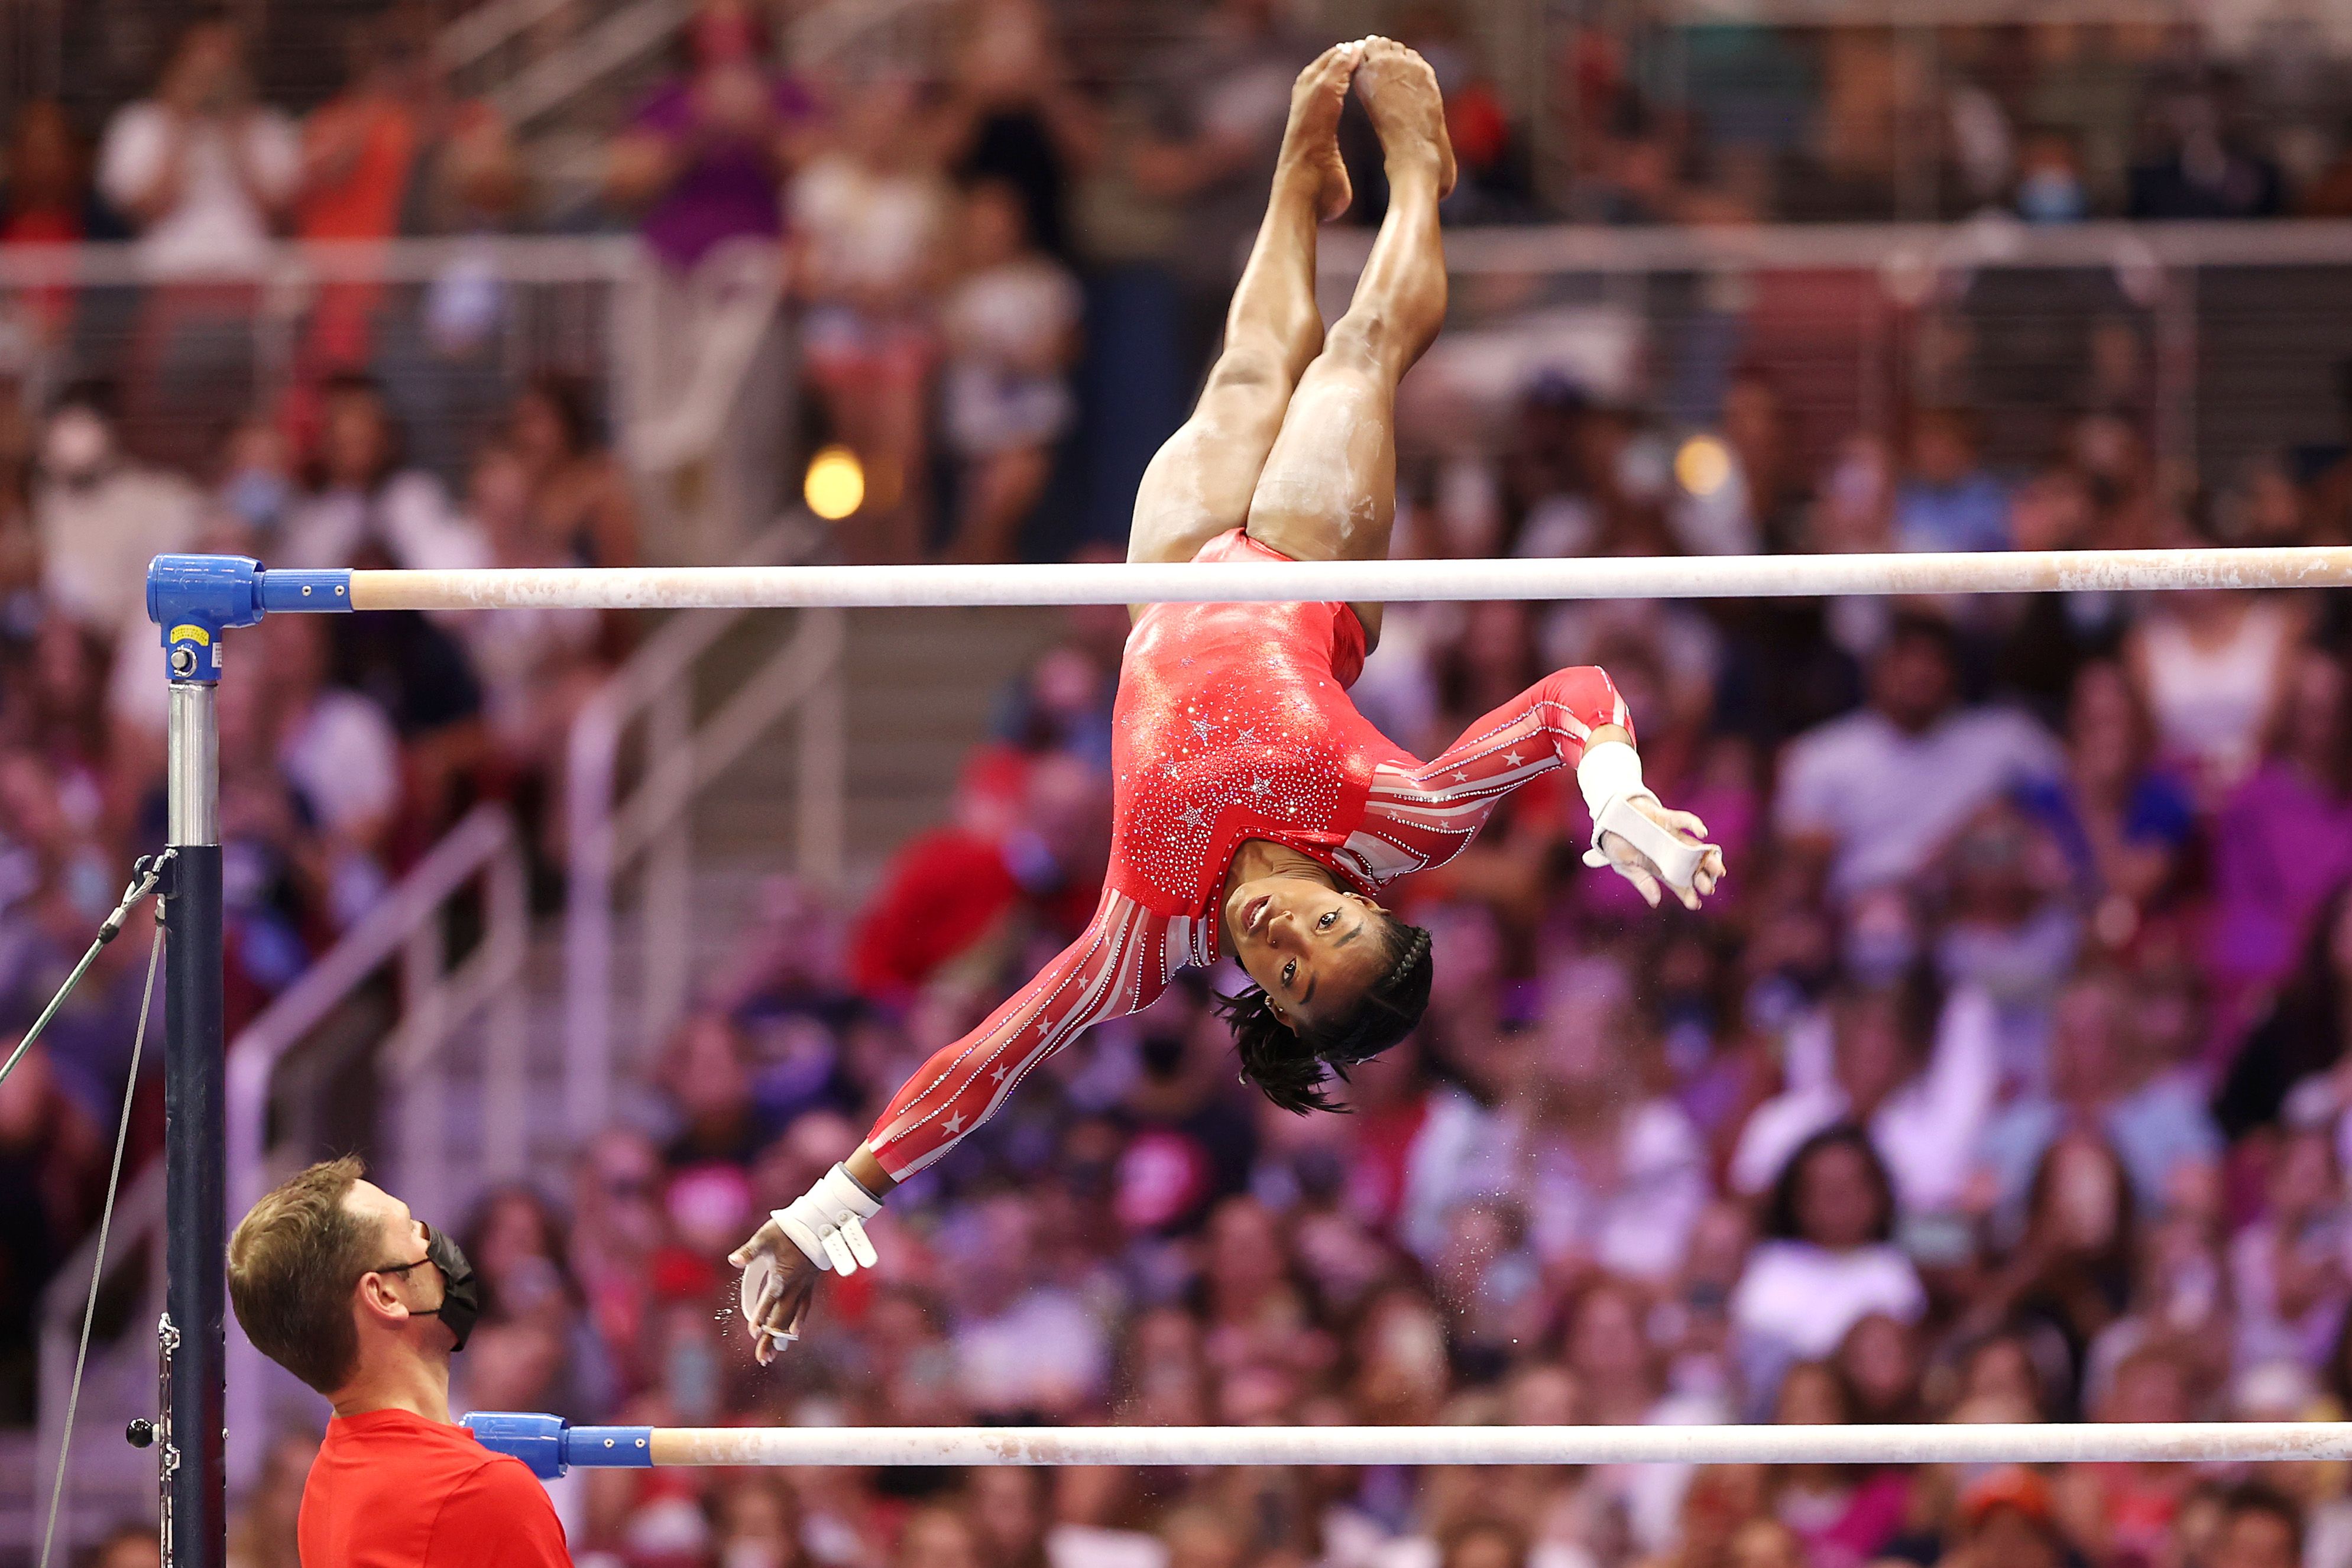 Simone Biles flipping over the uneven bars at the 2021 Olympic trials